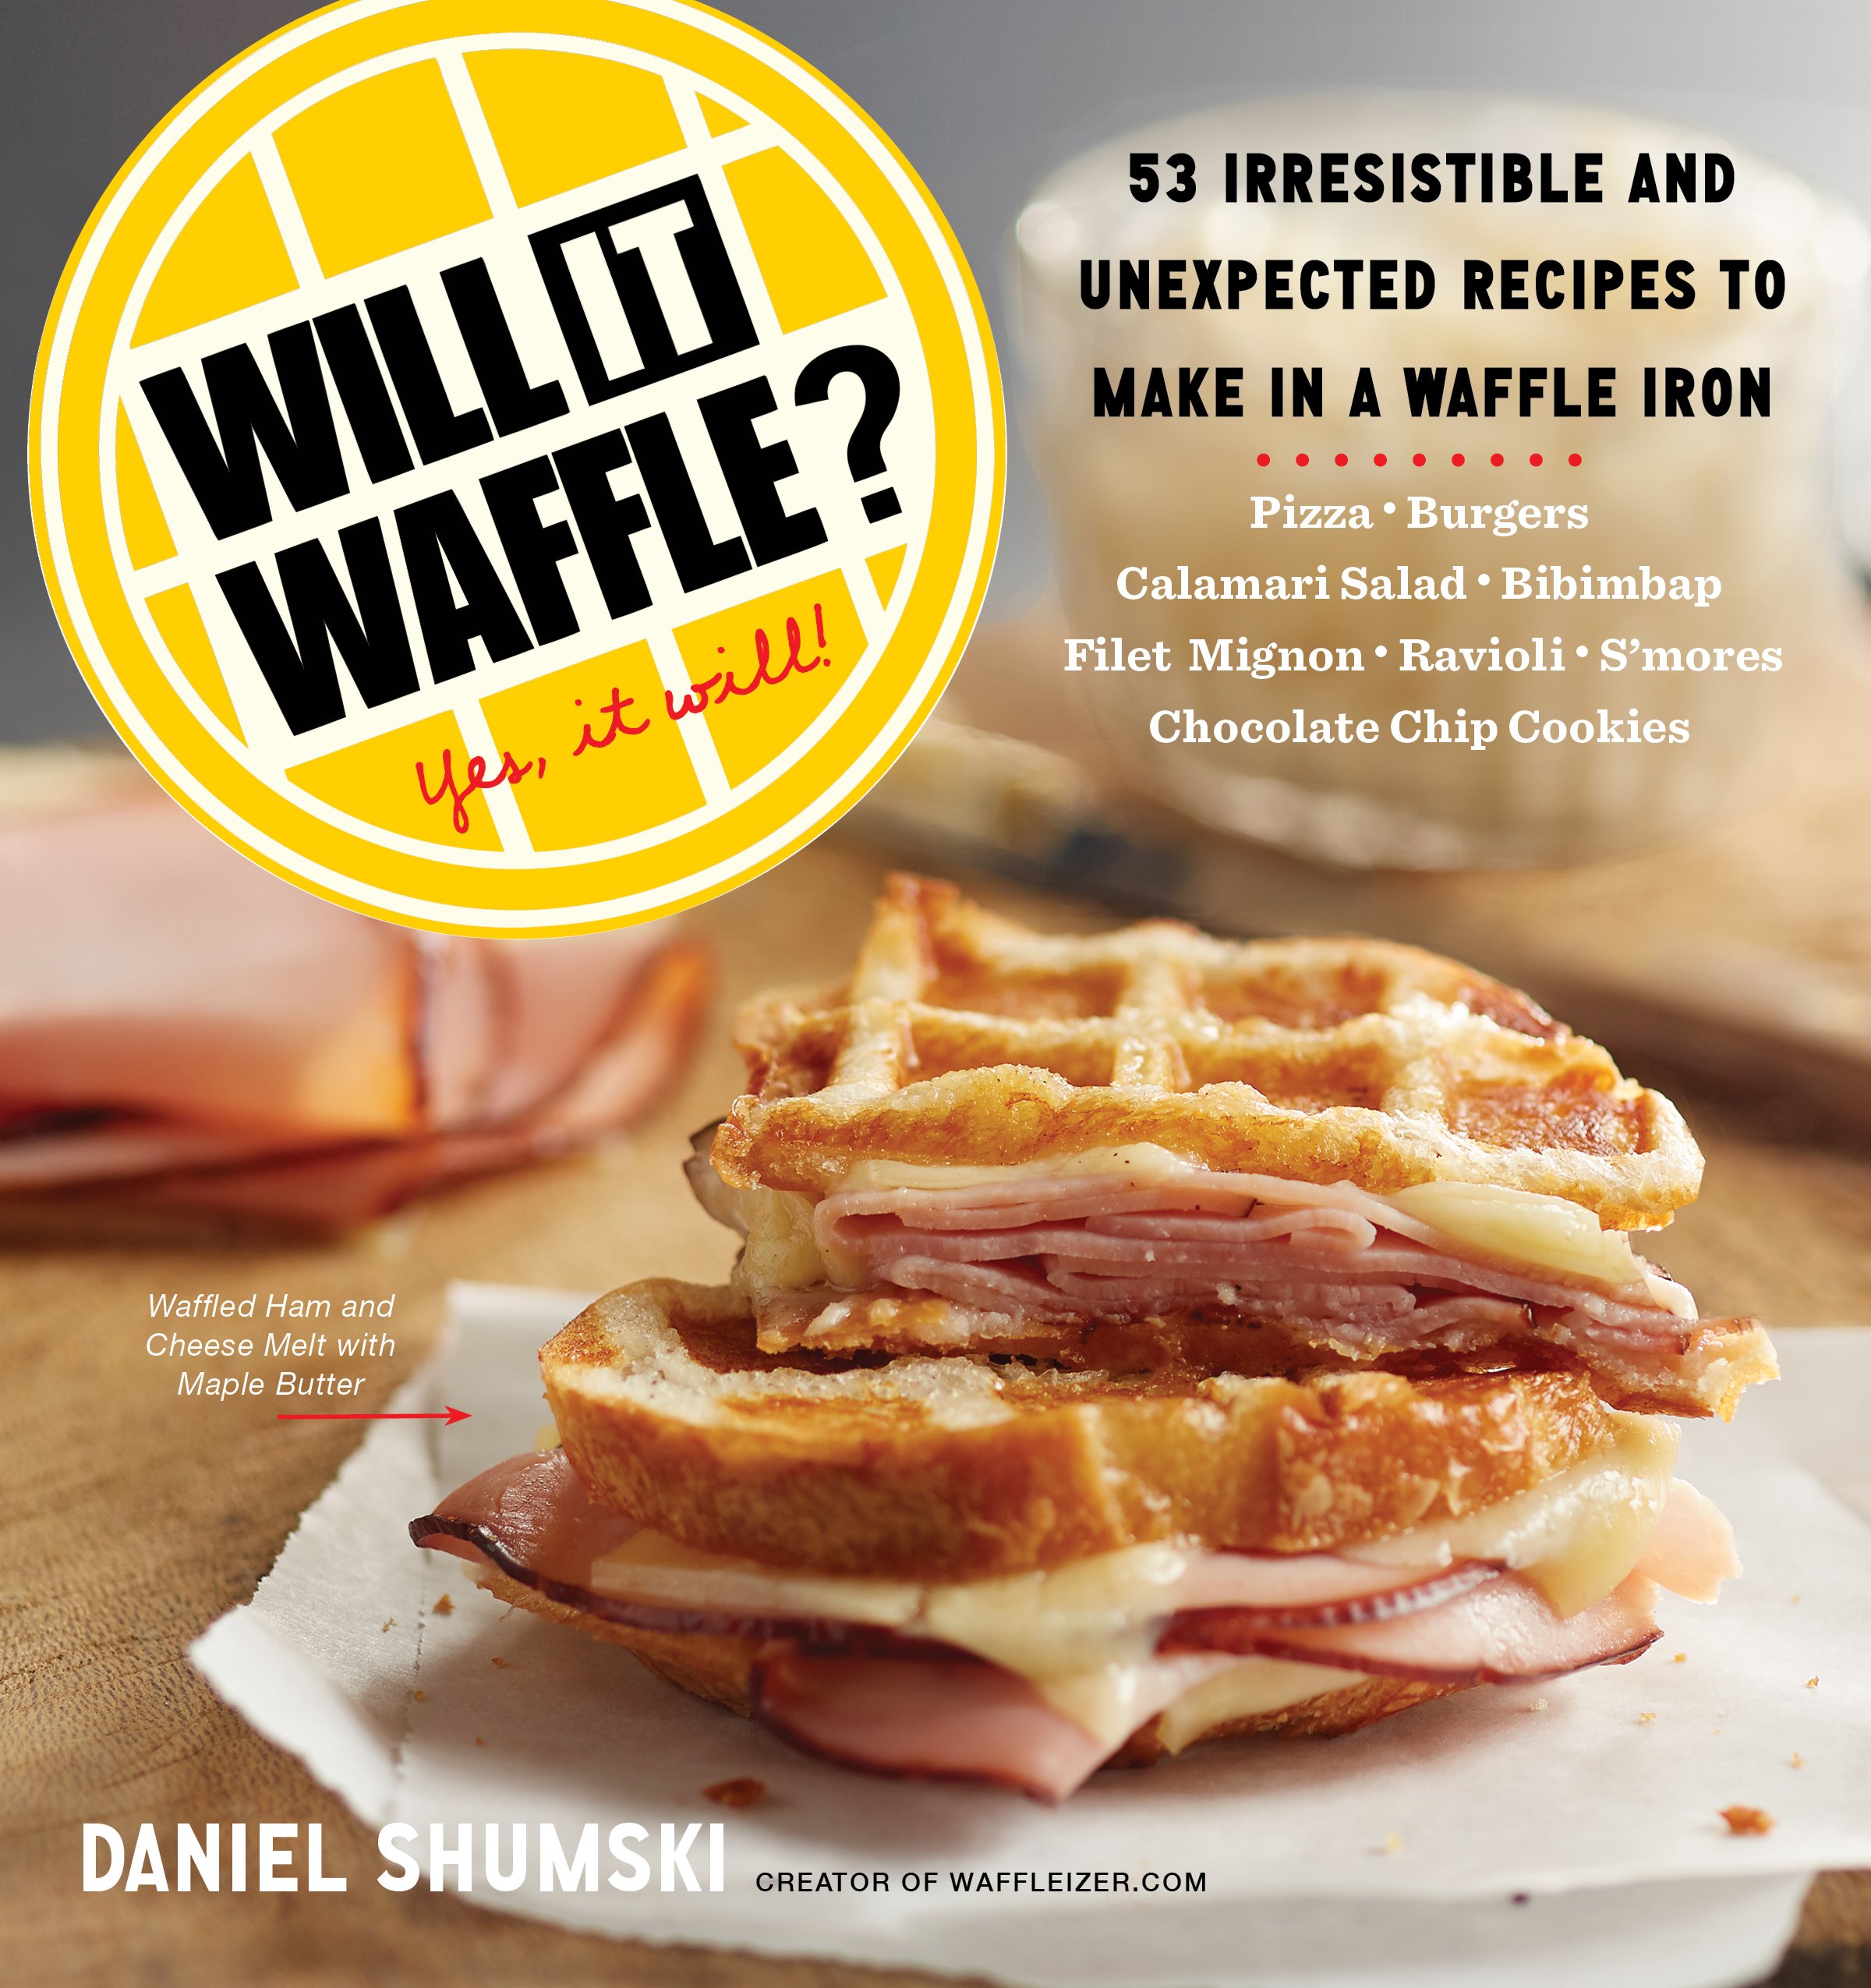 Will it Waffle book cover